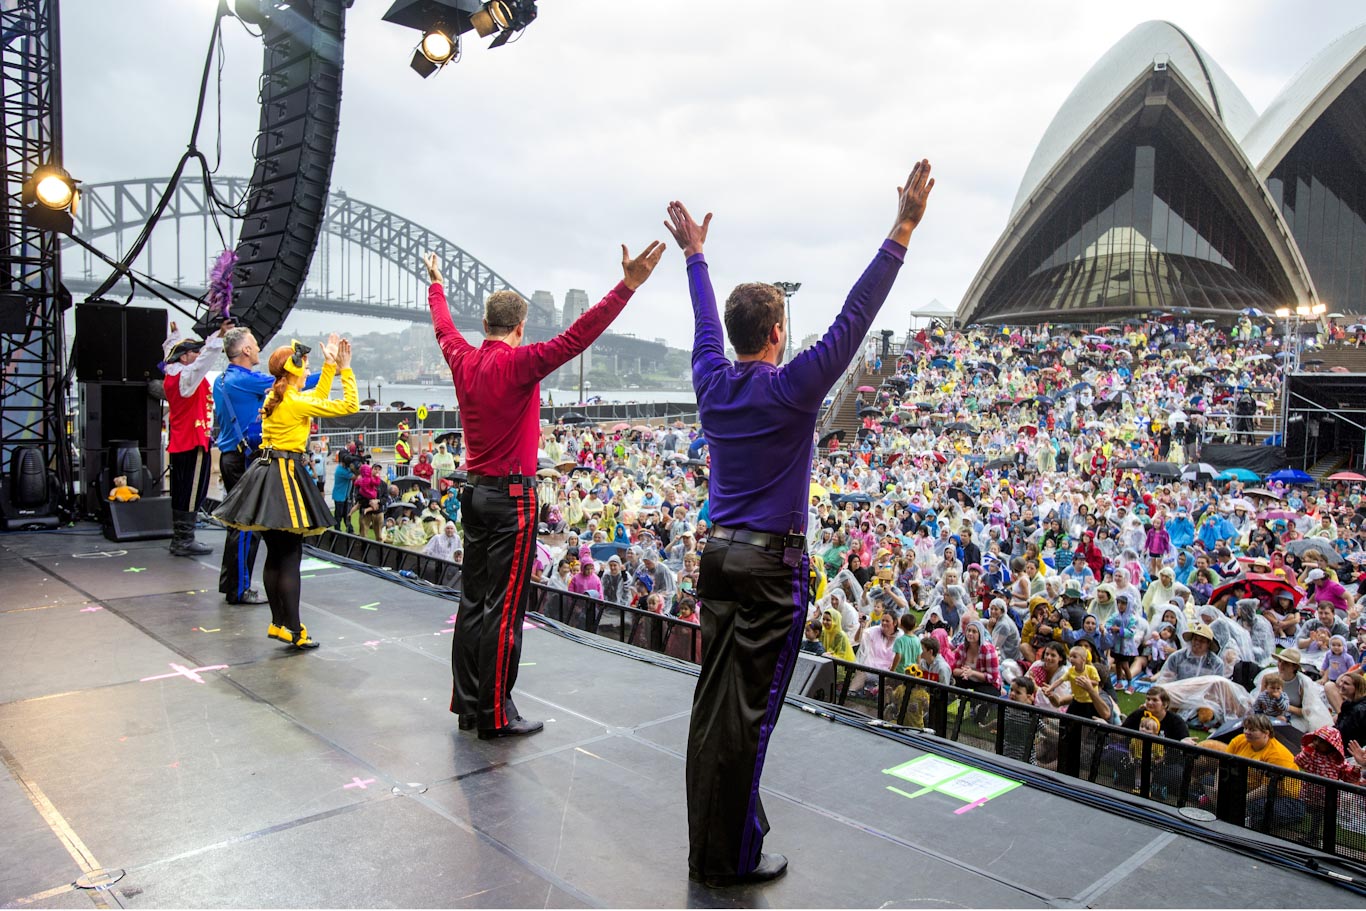 Crowds enjoying the Wiggles Australia Day concert on the forecourt of the Sydney Opera House